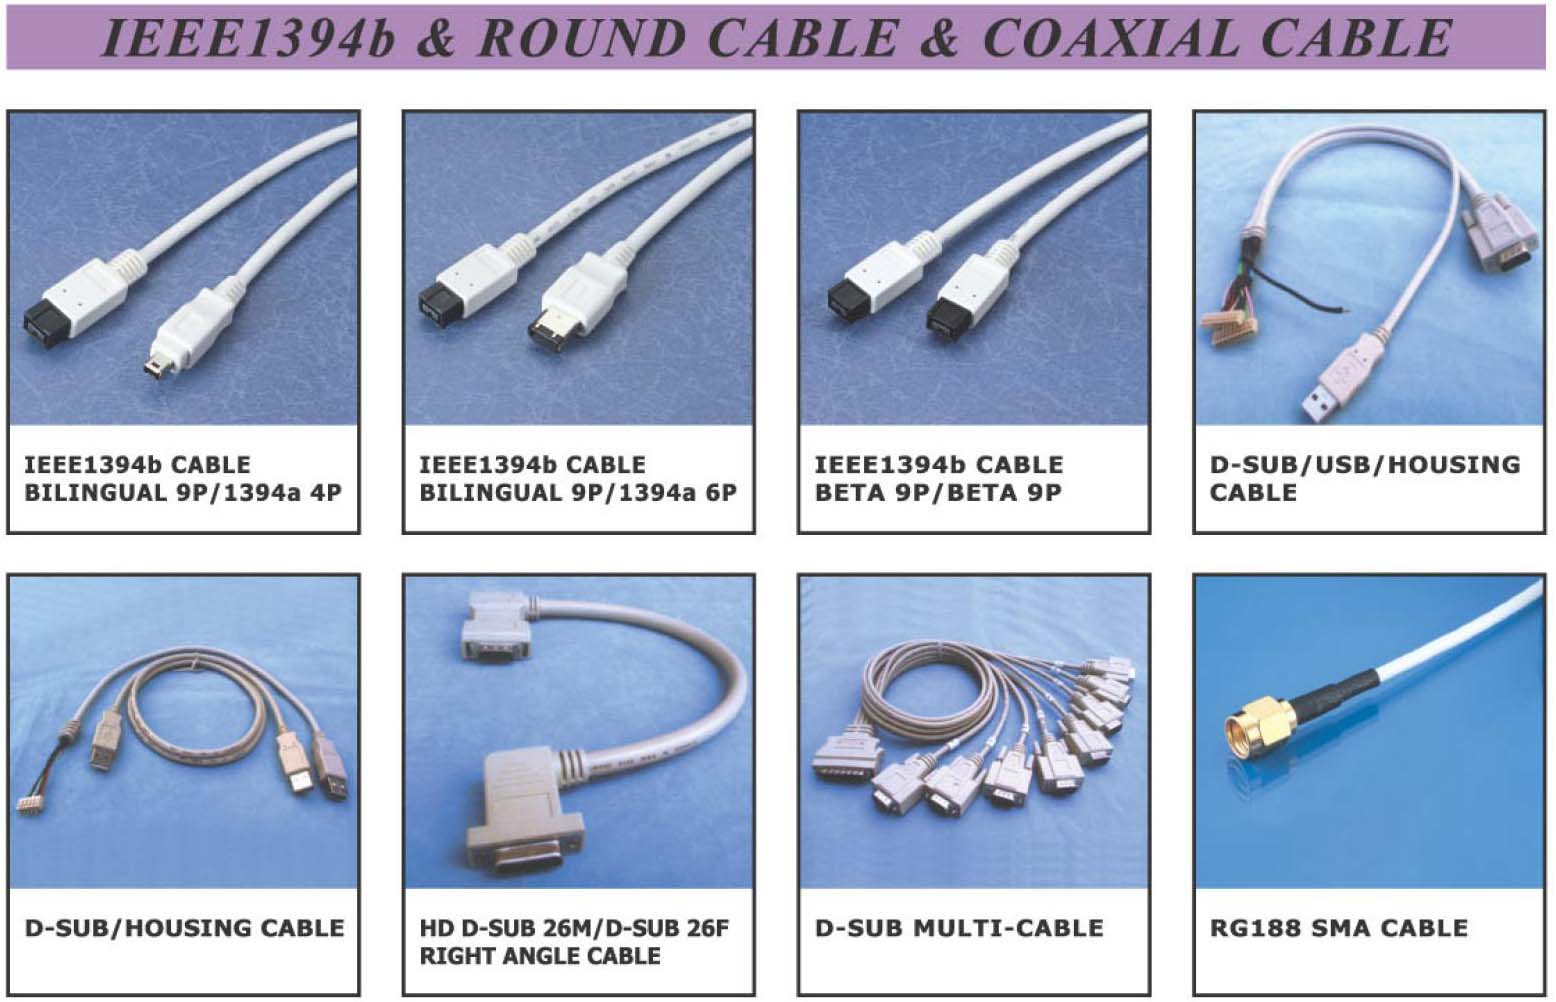 Connector, CableAssembly, WireHarness, PowerBank, WebCam,COAXIAL CABLE